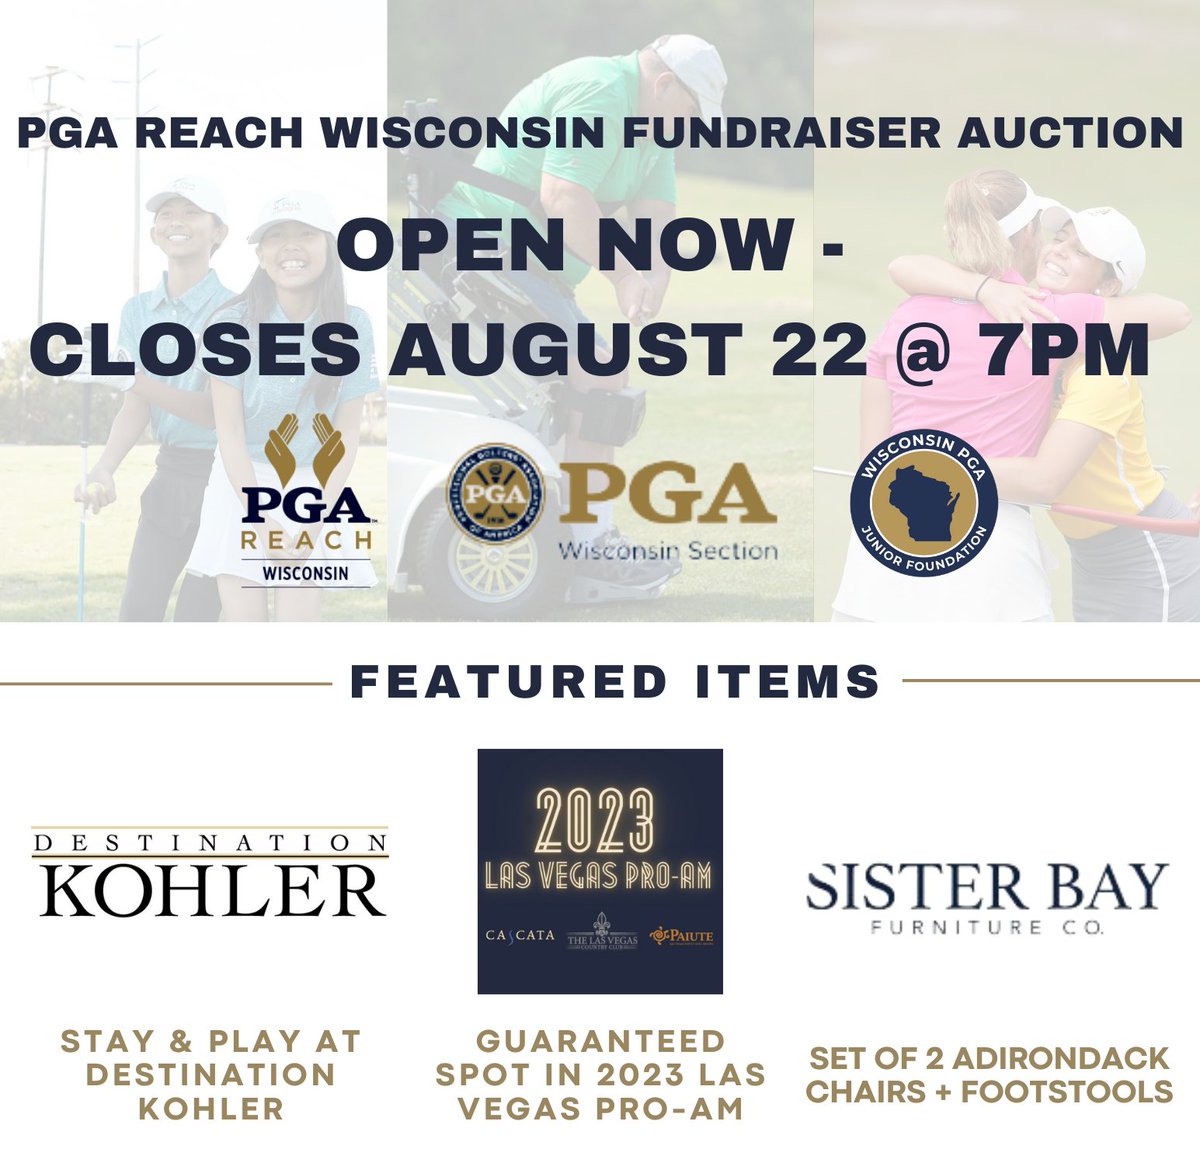 Our PGA Reach Wisconsin / @WPGAJuniorGolf Fundraiser Online Auction is now open. Some great items are available including foursomes to some of the best courses in the state. The auction site can be found here - event.auctria.com/4f8f16fb-36a0-…